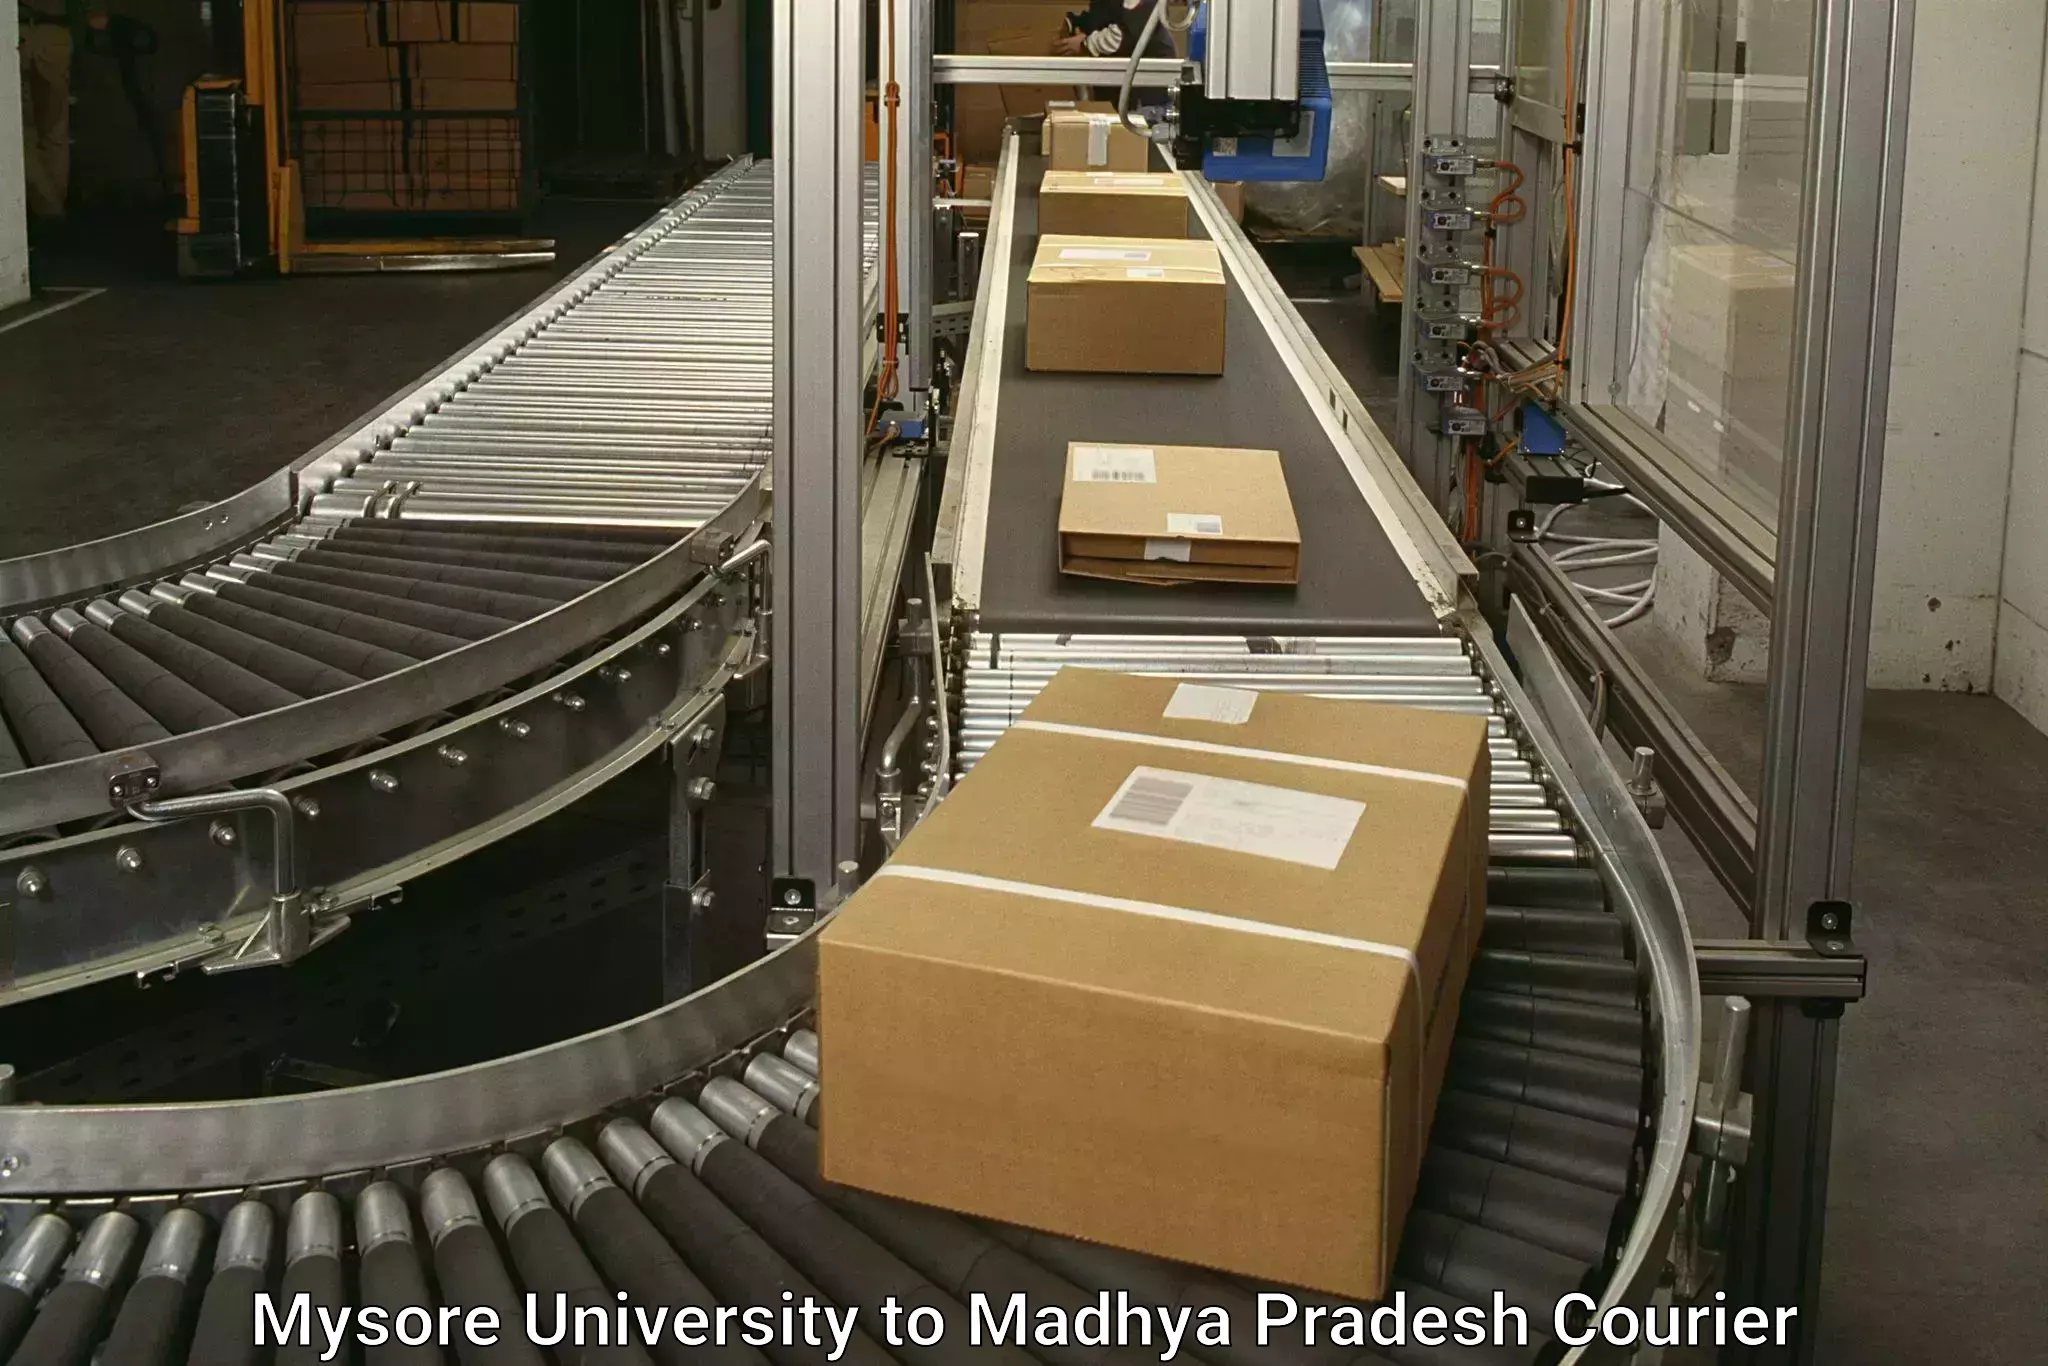 Professional courier services in Mysore University to Mundi